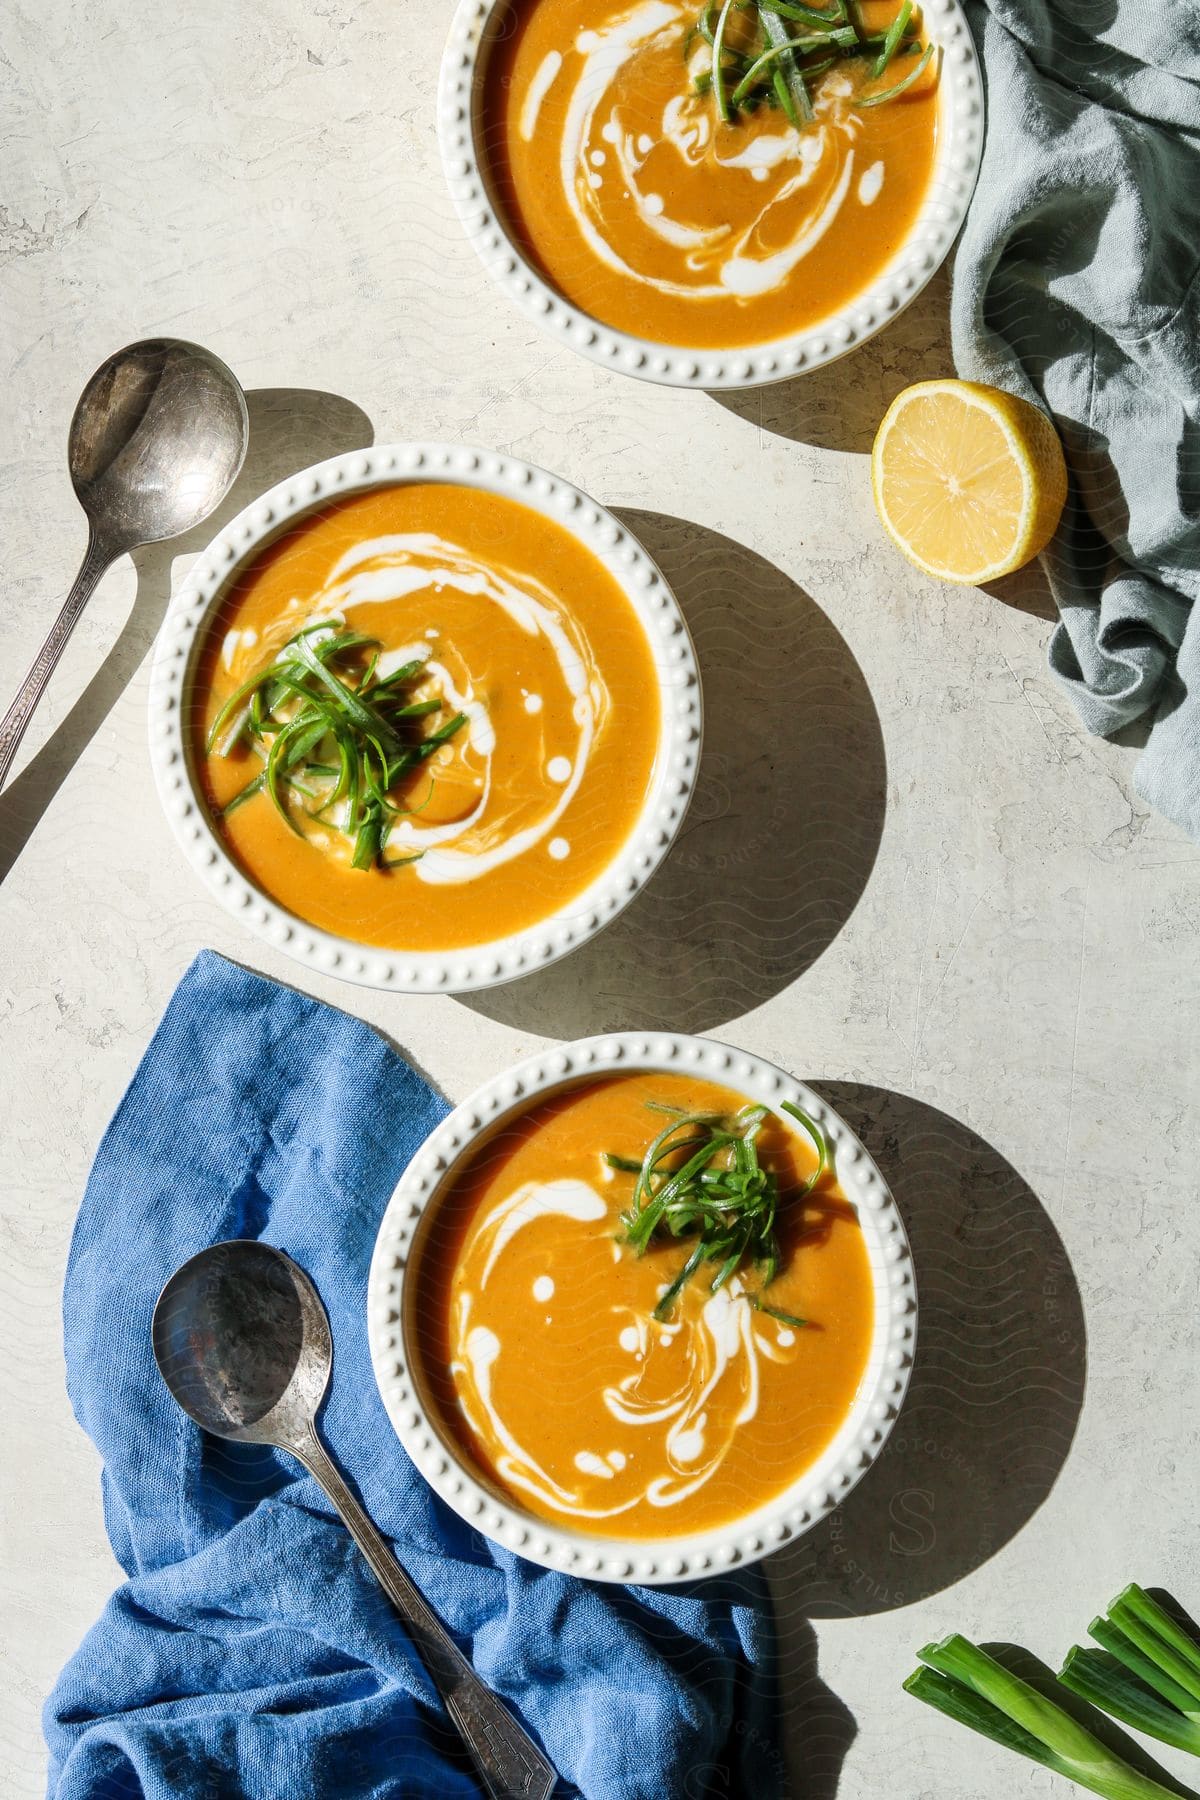 Three bowls of orange soup with lemon and spoons surrounding the bowls